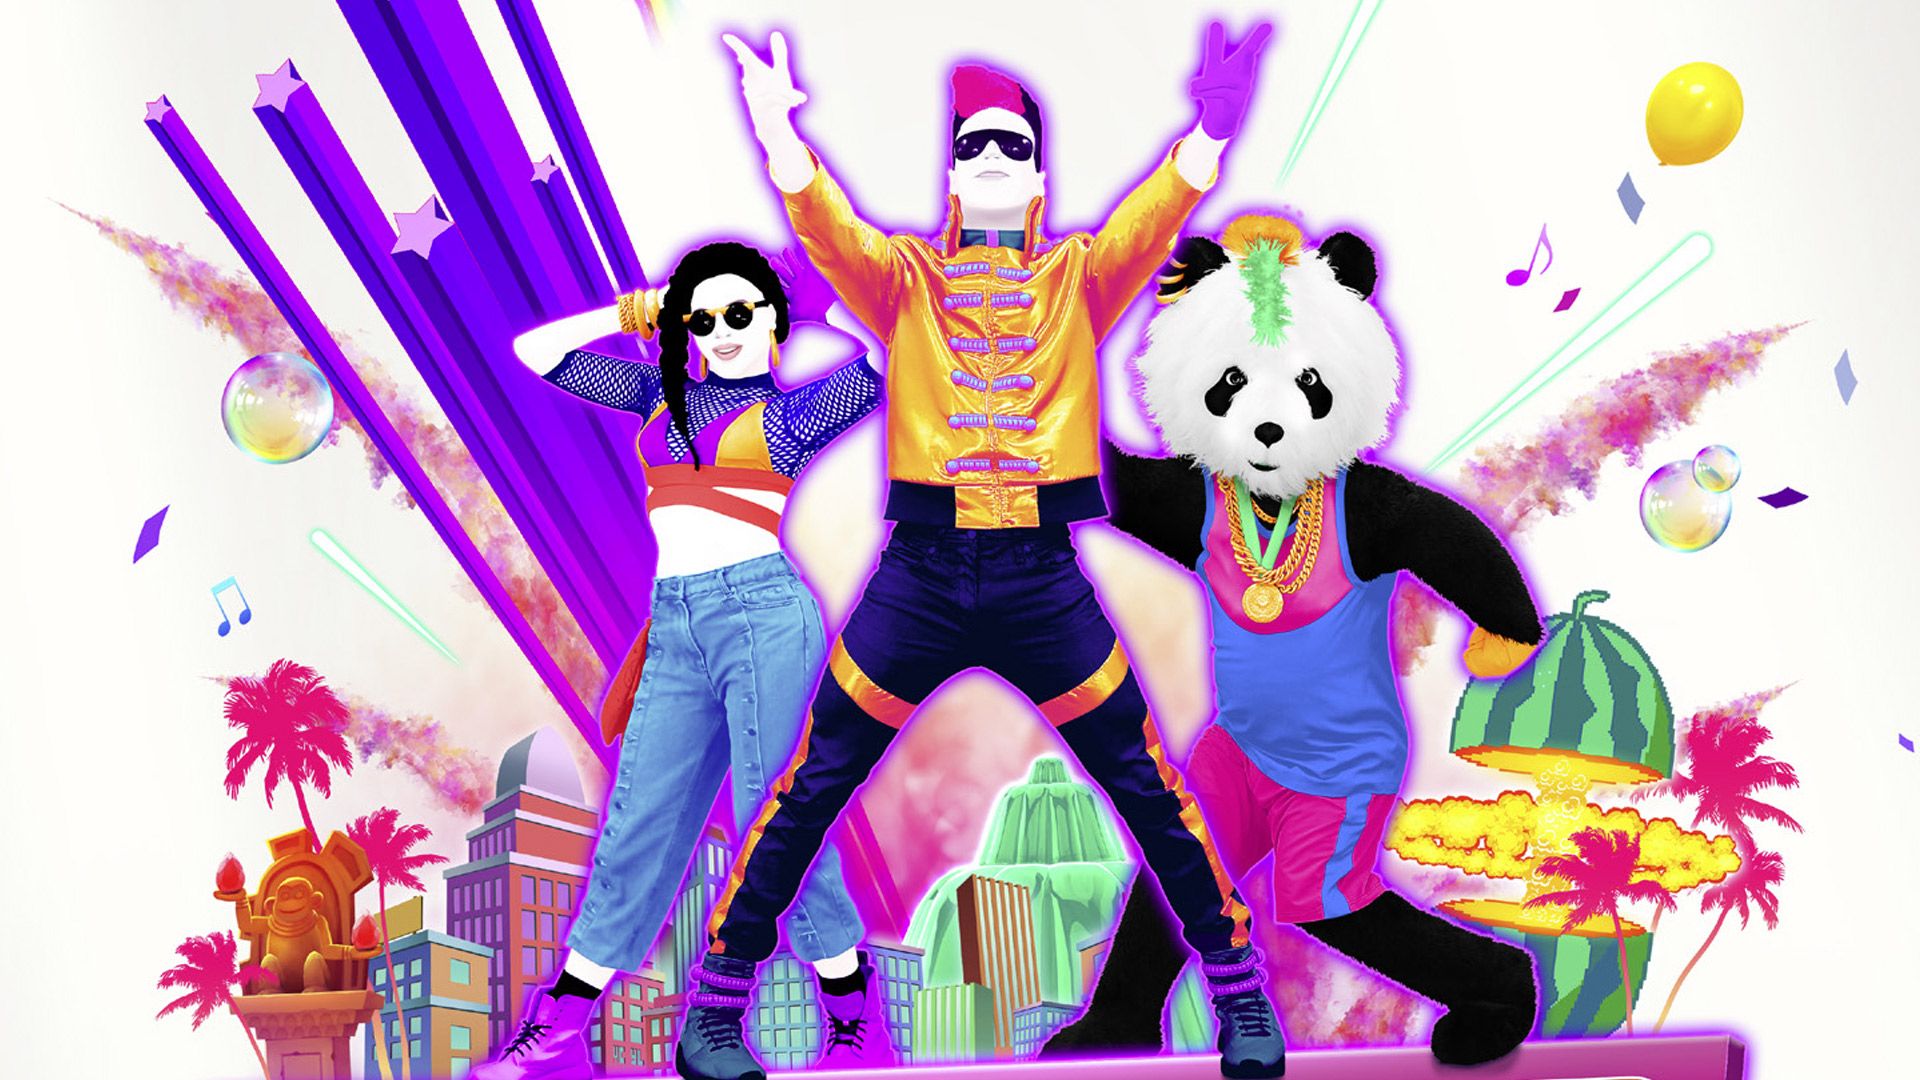 Game Just Dance 2019 Wallpaper 67367 1920x1080px